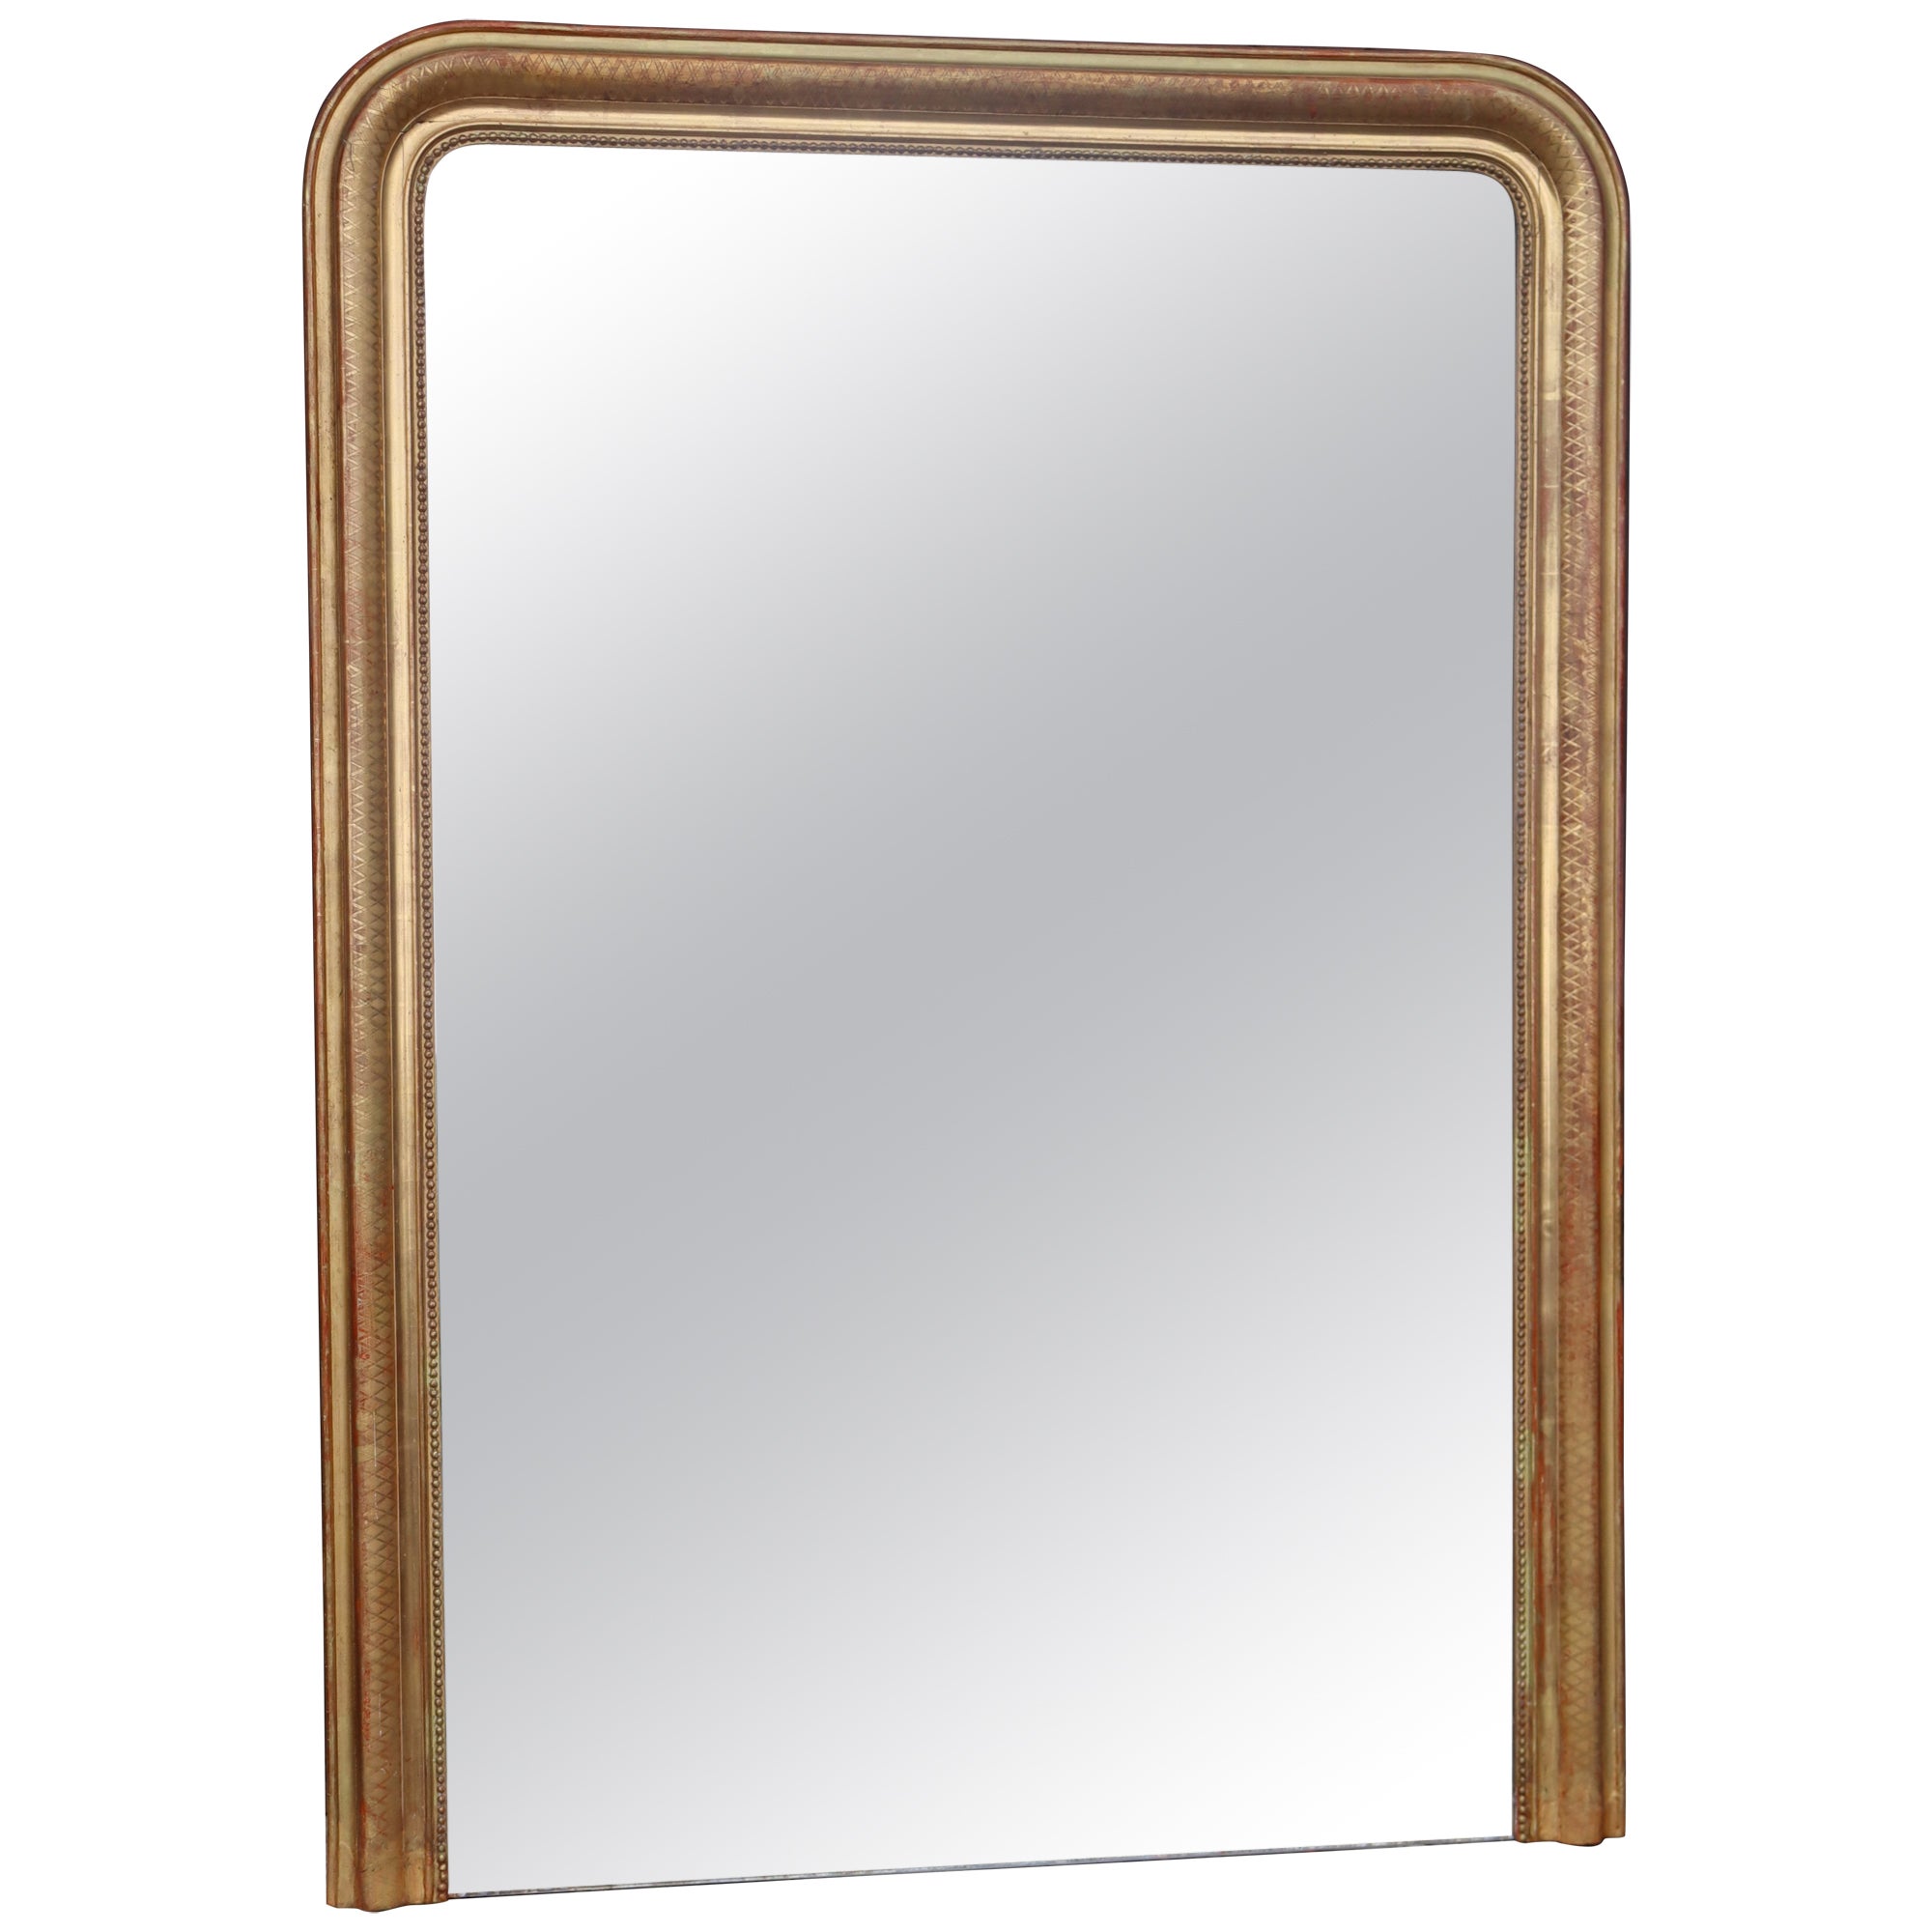 Large Louis Philippe Fireplace Mirror In Golden Wood 175cm High For Sale